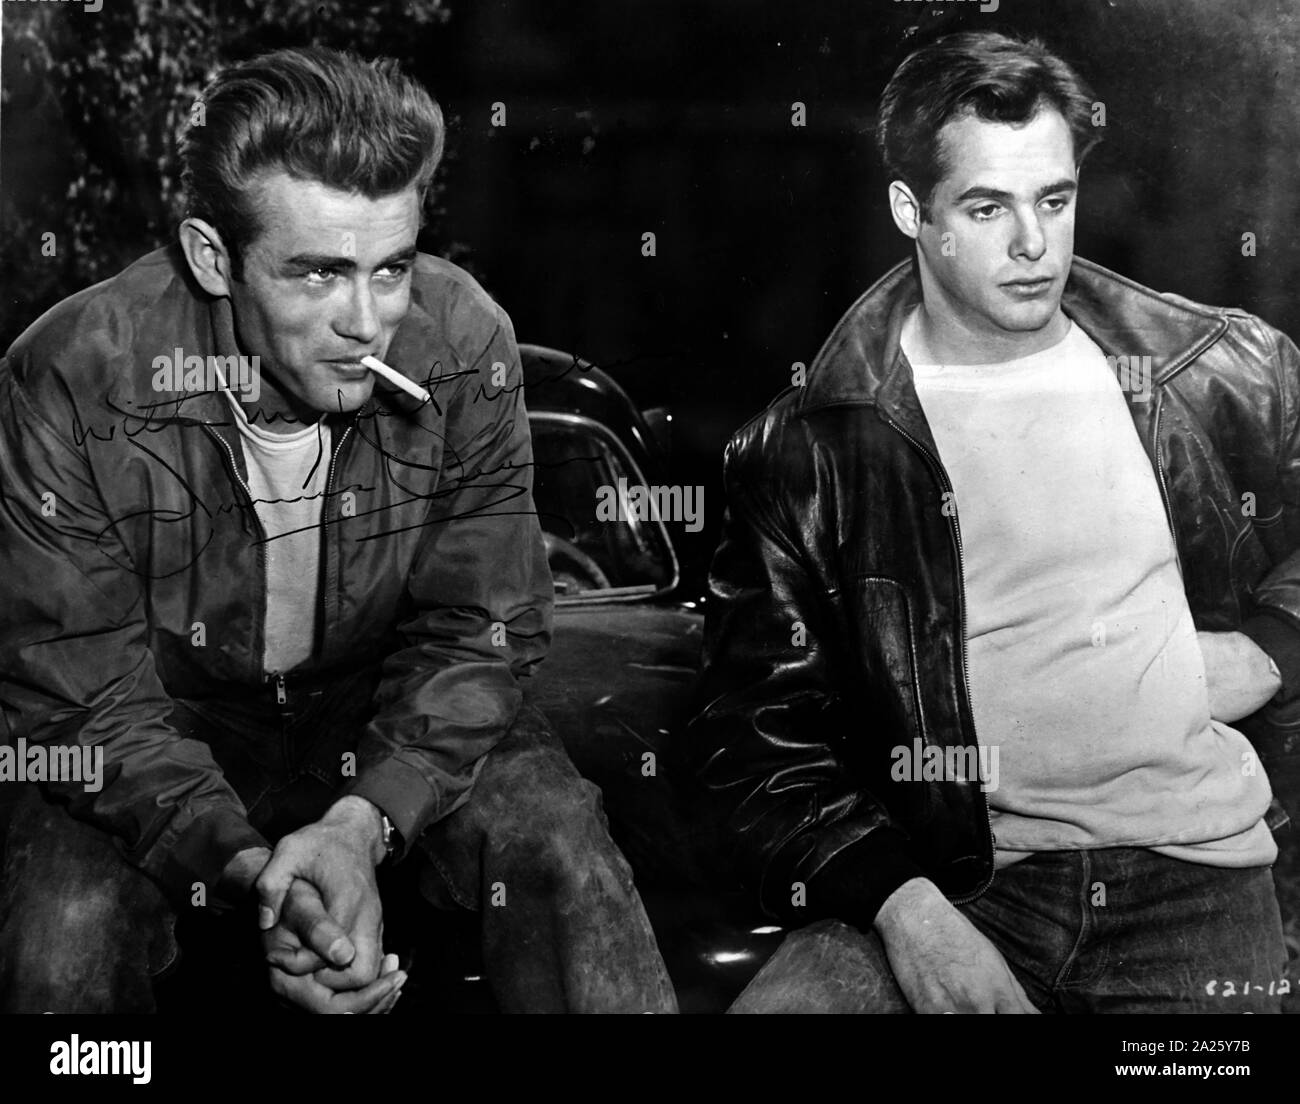 An autographed photograph of James Dean and Marlon Brando. James Dean (1931-1955) an American actor. Marlon Brando (1924-2004) an American actor and film director. Stock Photo